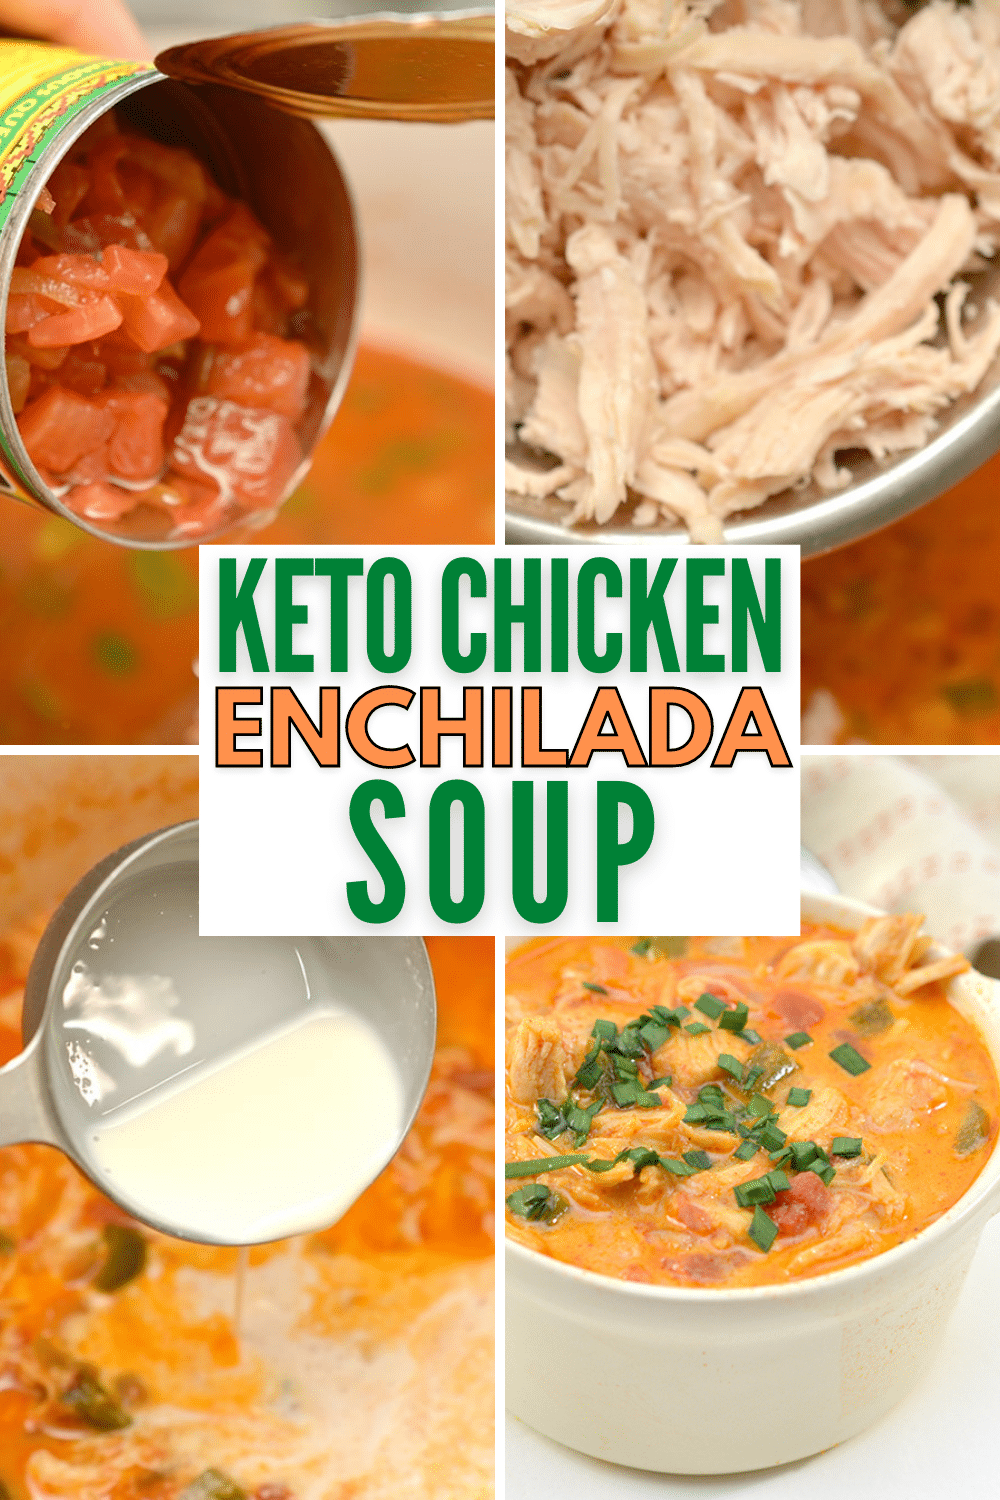 The perfect weeknight dinner recipe - keto chicken enchilada soup! It’s not only low carb, but super creamy and easy to make, too. #keto #lowcarb #chickensoup #enchilada via @wondermomwannab